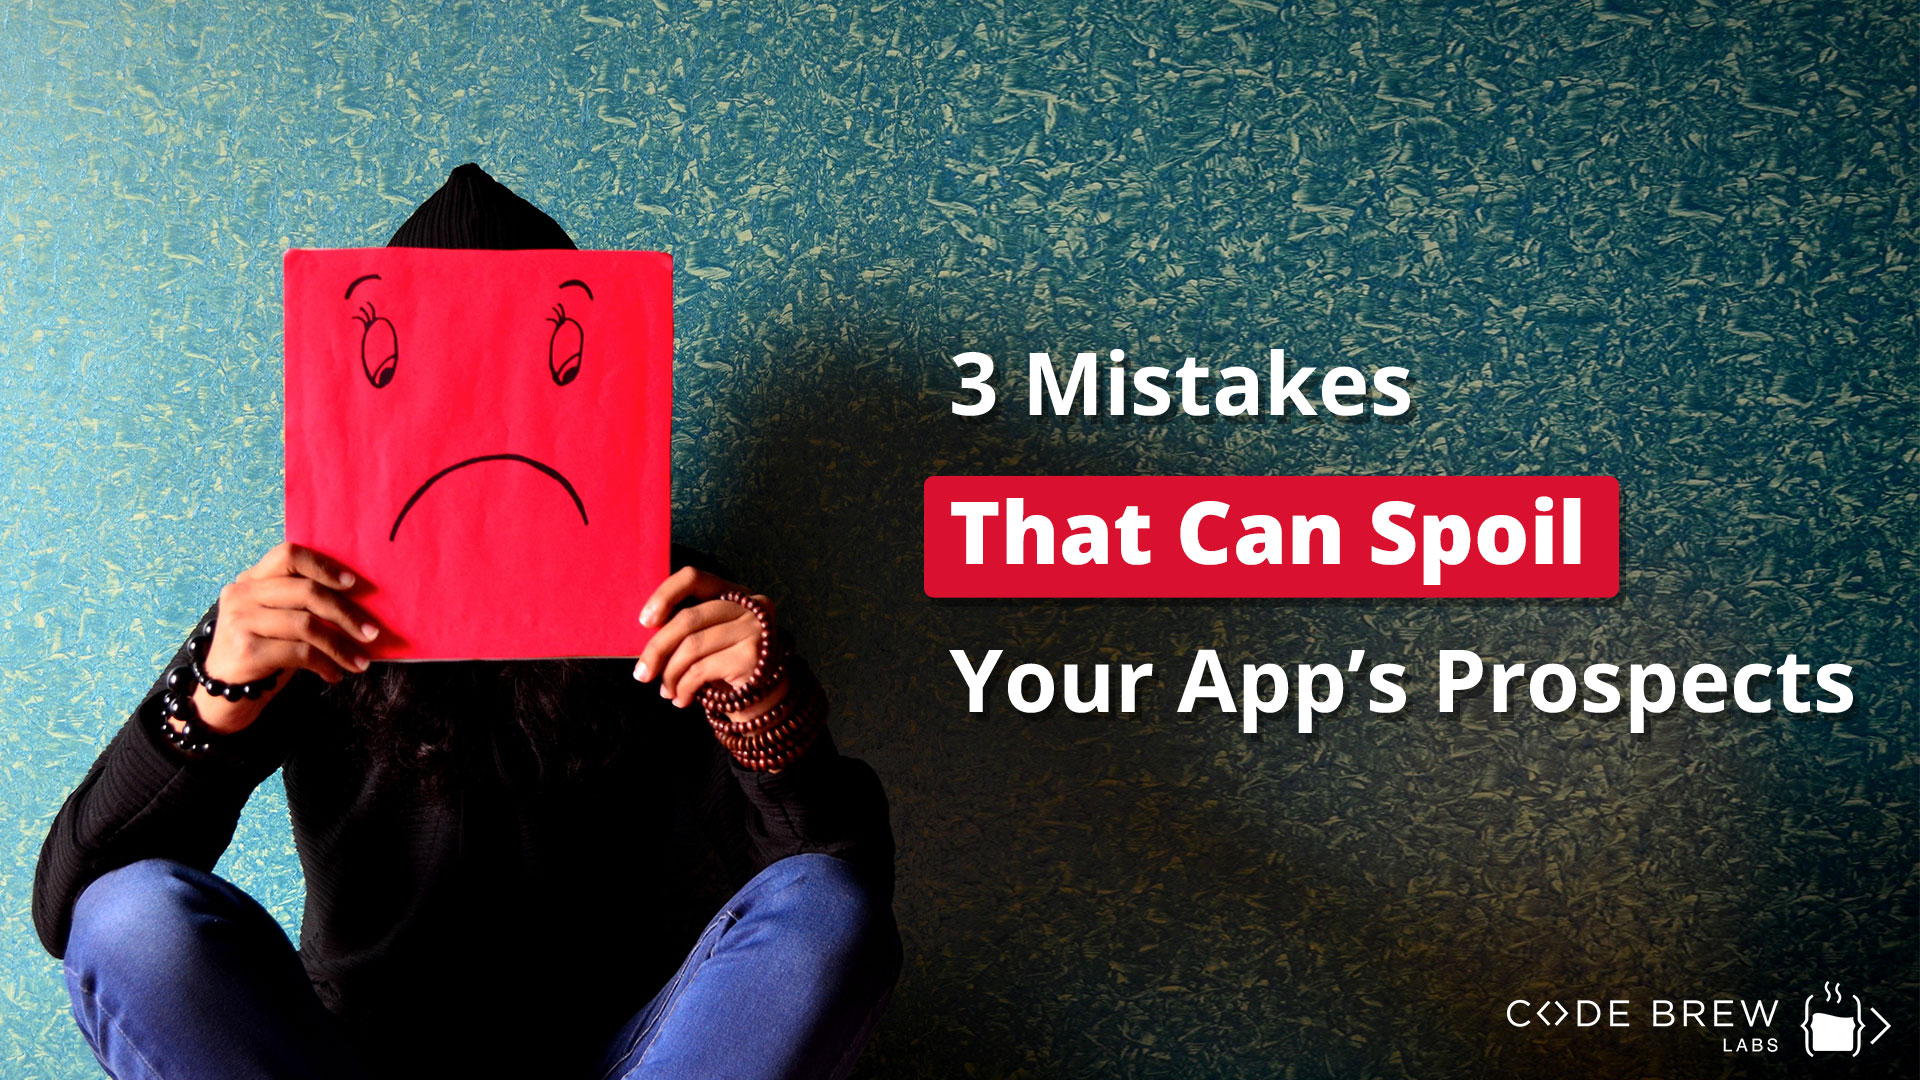 3 Mistakes That Can Spoil Your App’s Prospects